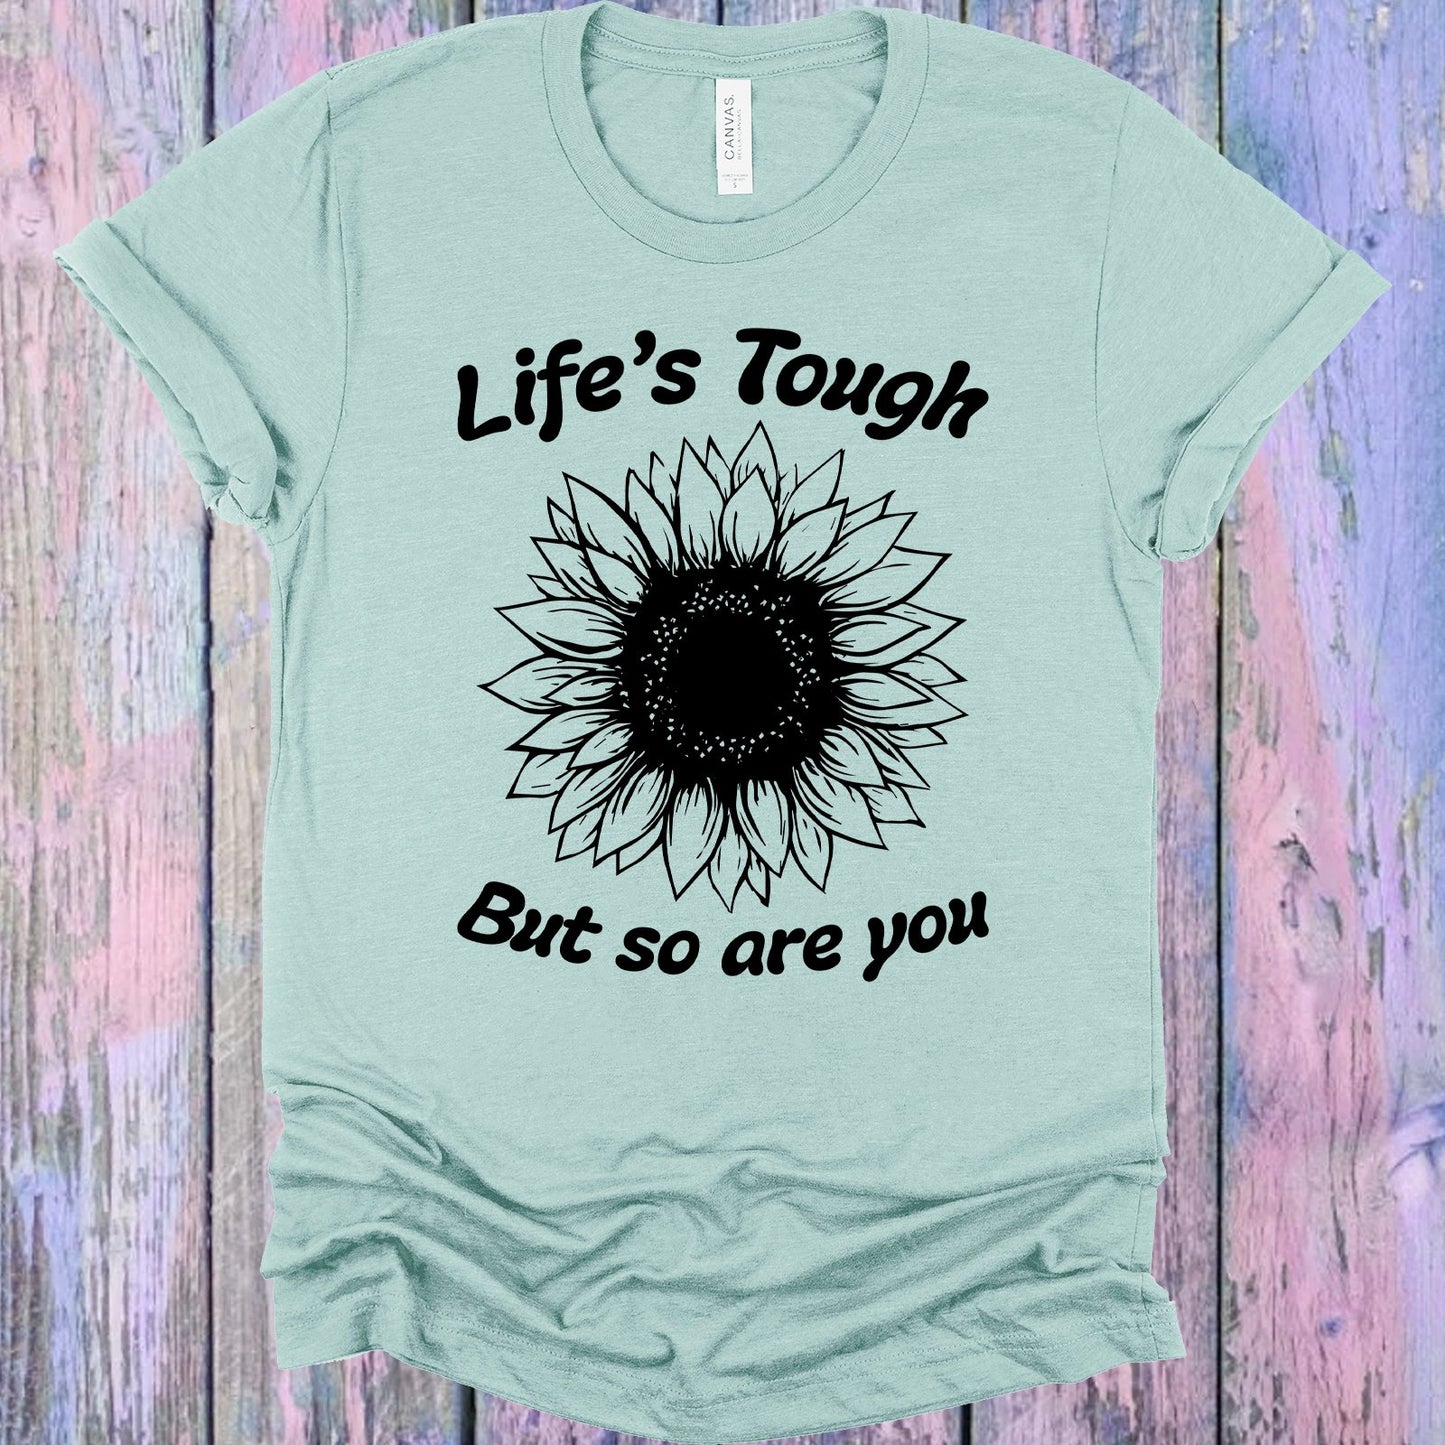 Lifes Tough But So Are You Graphic Tee Graphic Tee